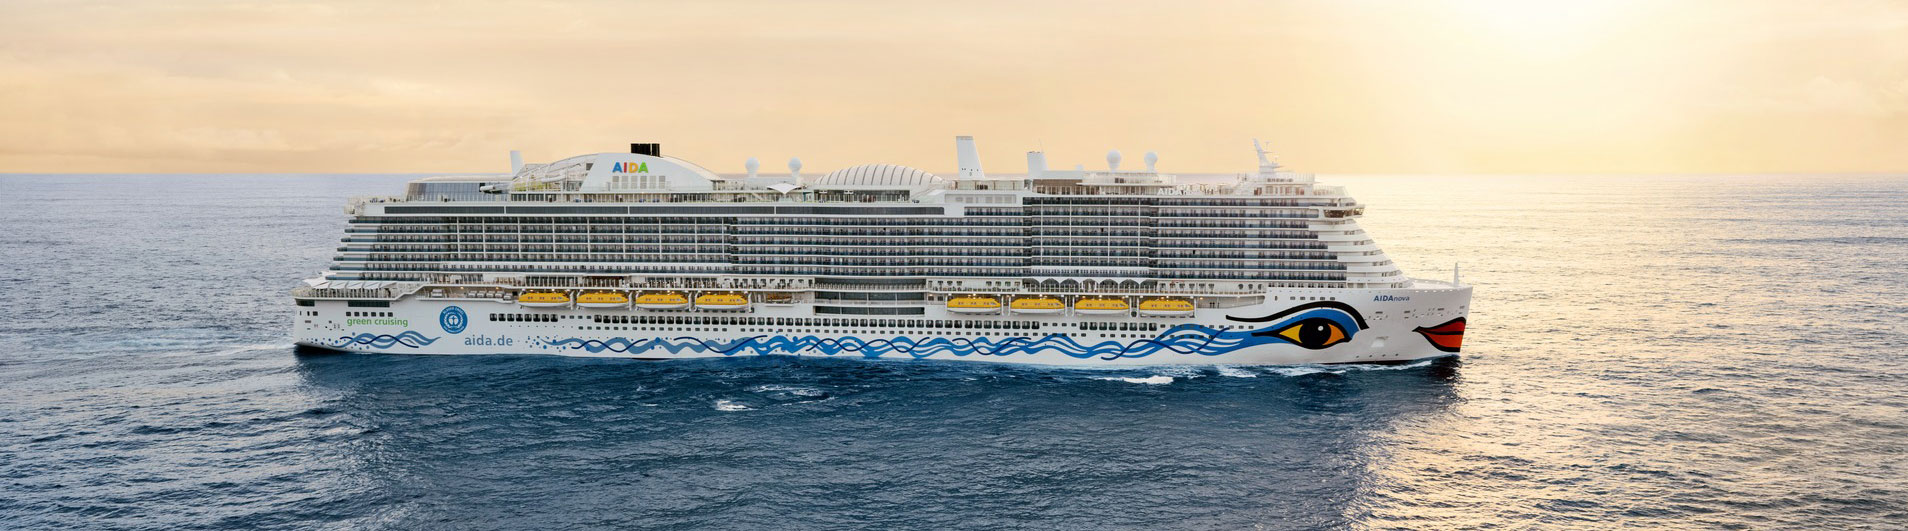 In December 2018, Carnival Corporation introduced with AIDAnova from its brand AIDA Cruises, the world's first cruise ship fully powered in port and at sea by liquefied natural gas (LNG). Copyrights: AIDA Cruises.